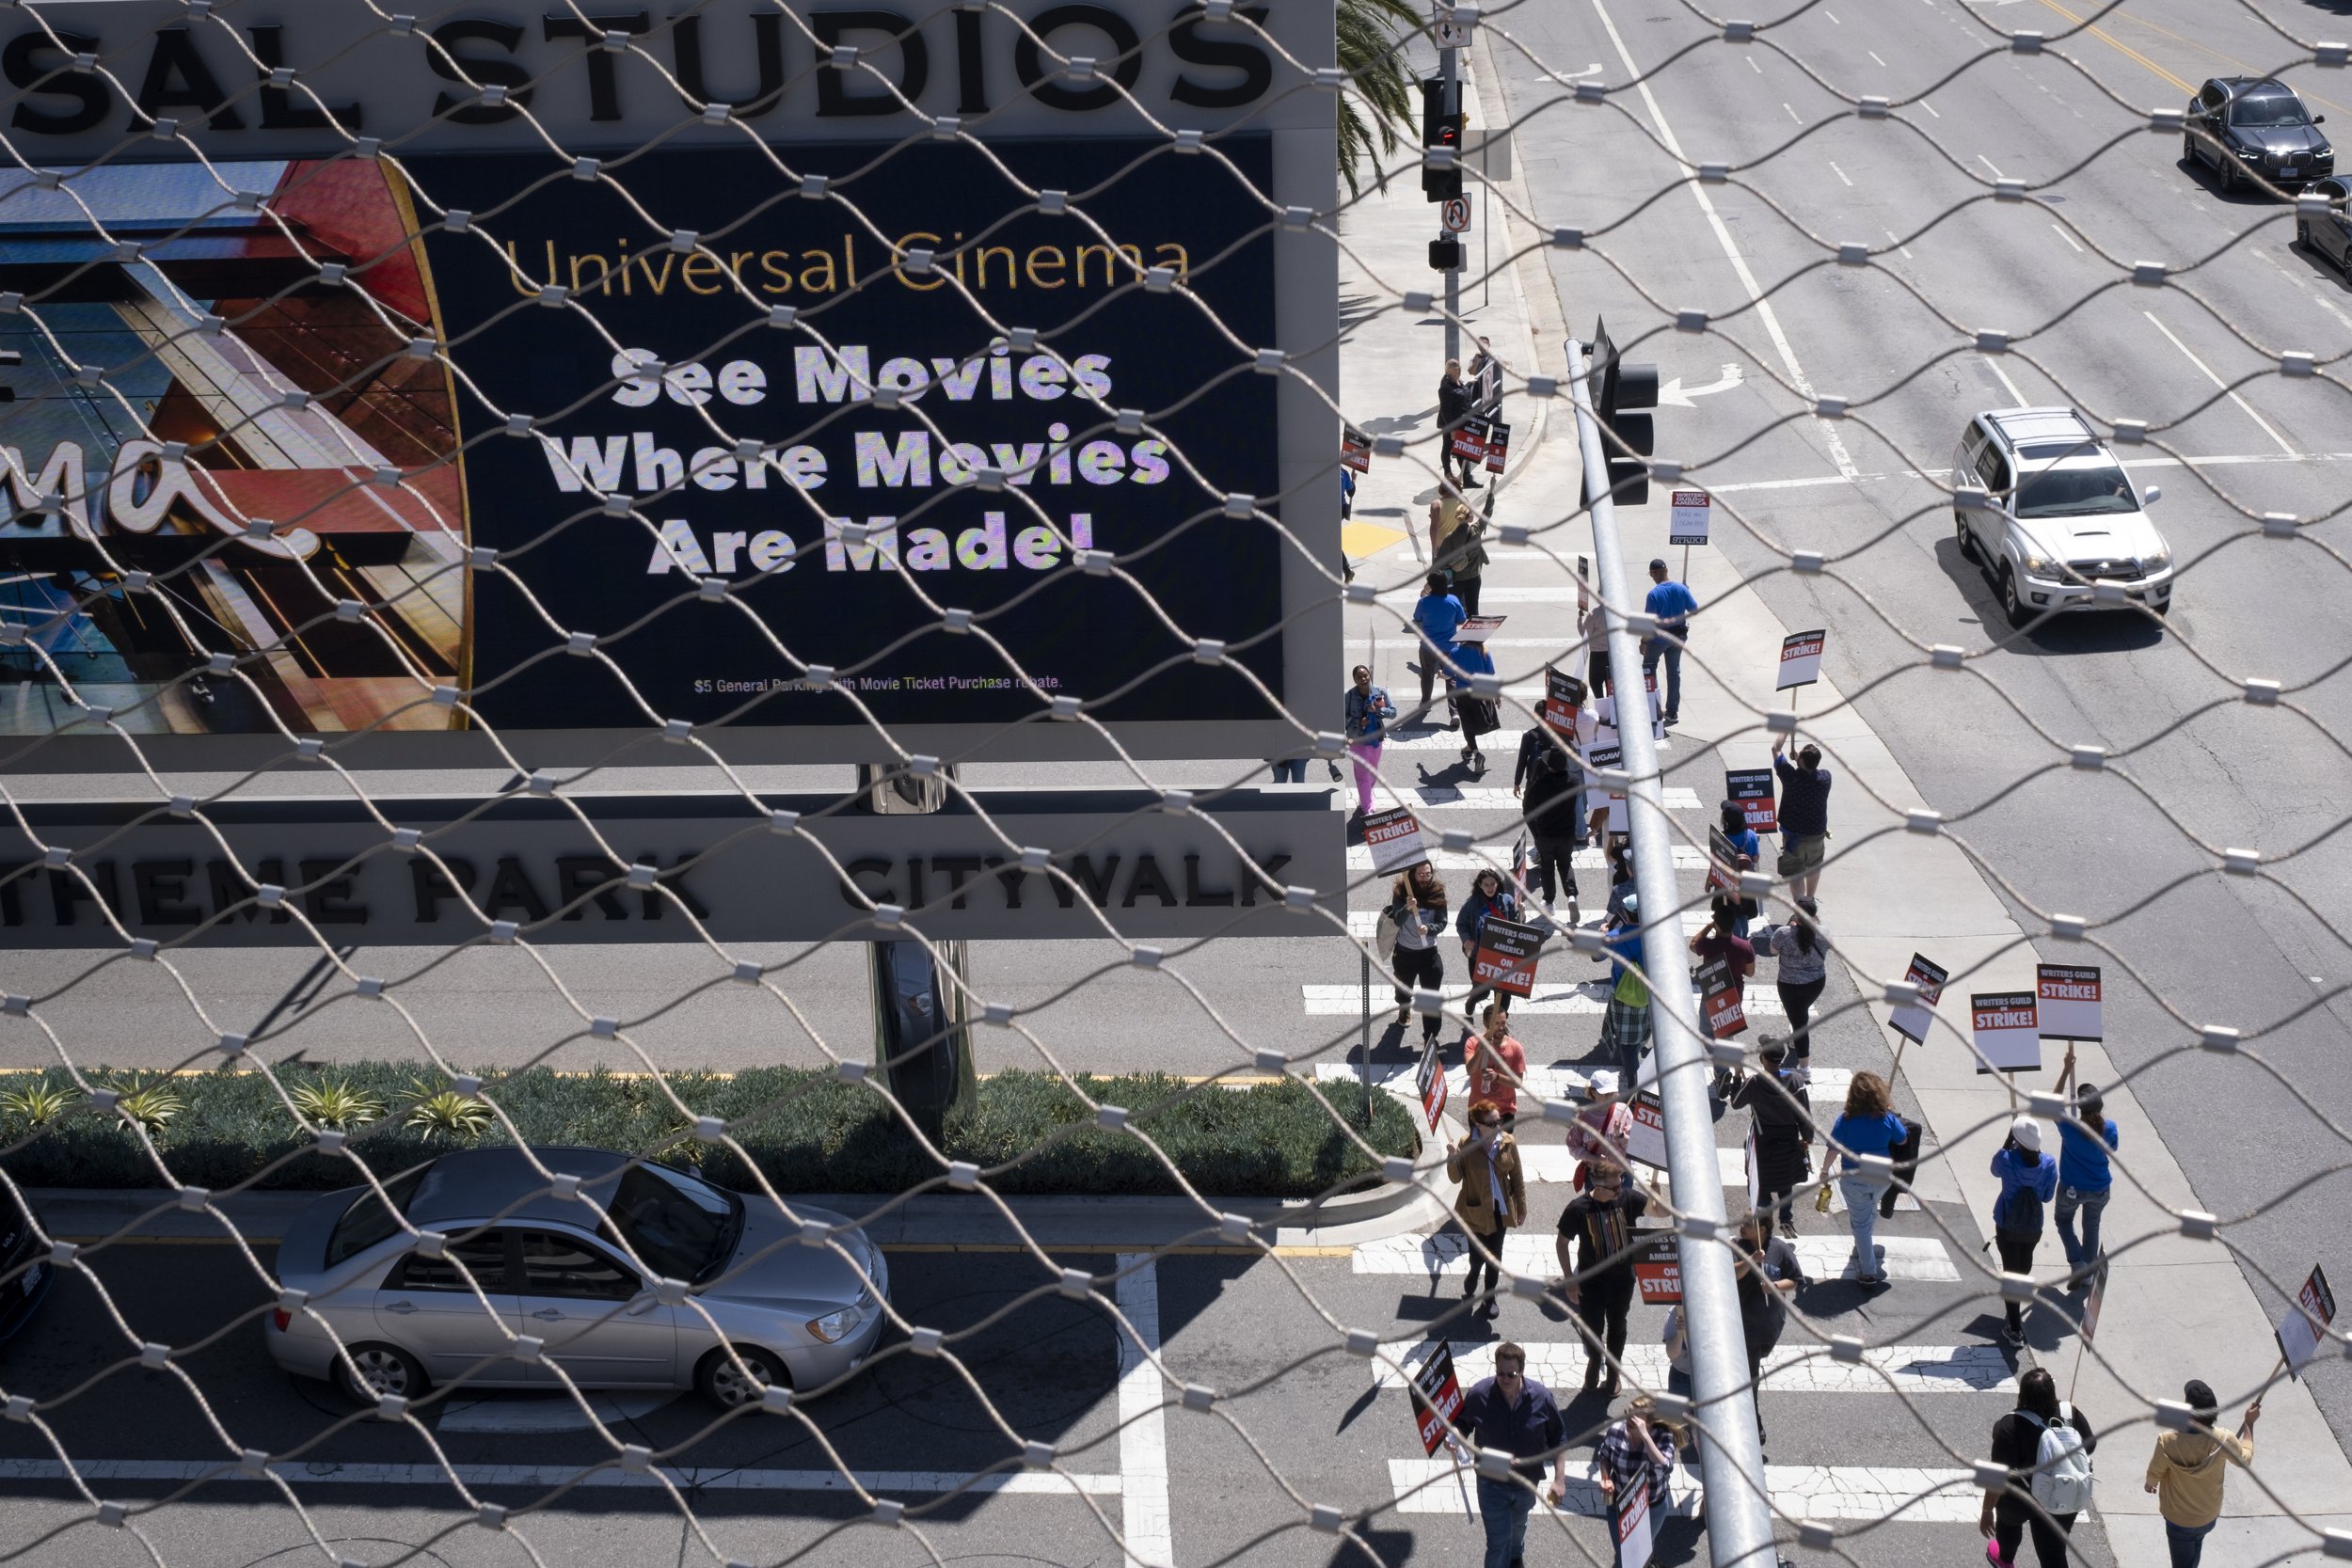  Writers Guild of America members picket in front of Universal Studios in Studio City, Calif. on Tuesday, May 2 following disagreements within negotiations between the Alliance of Motion Pictures and Television Producers. (Anna Sophia Moltke | The Co